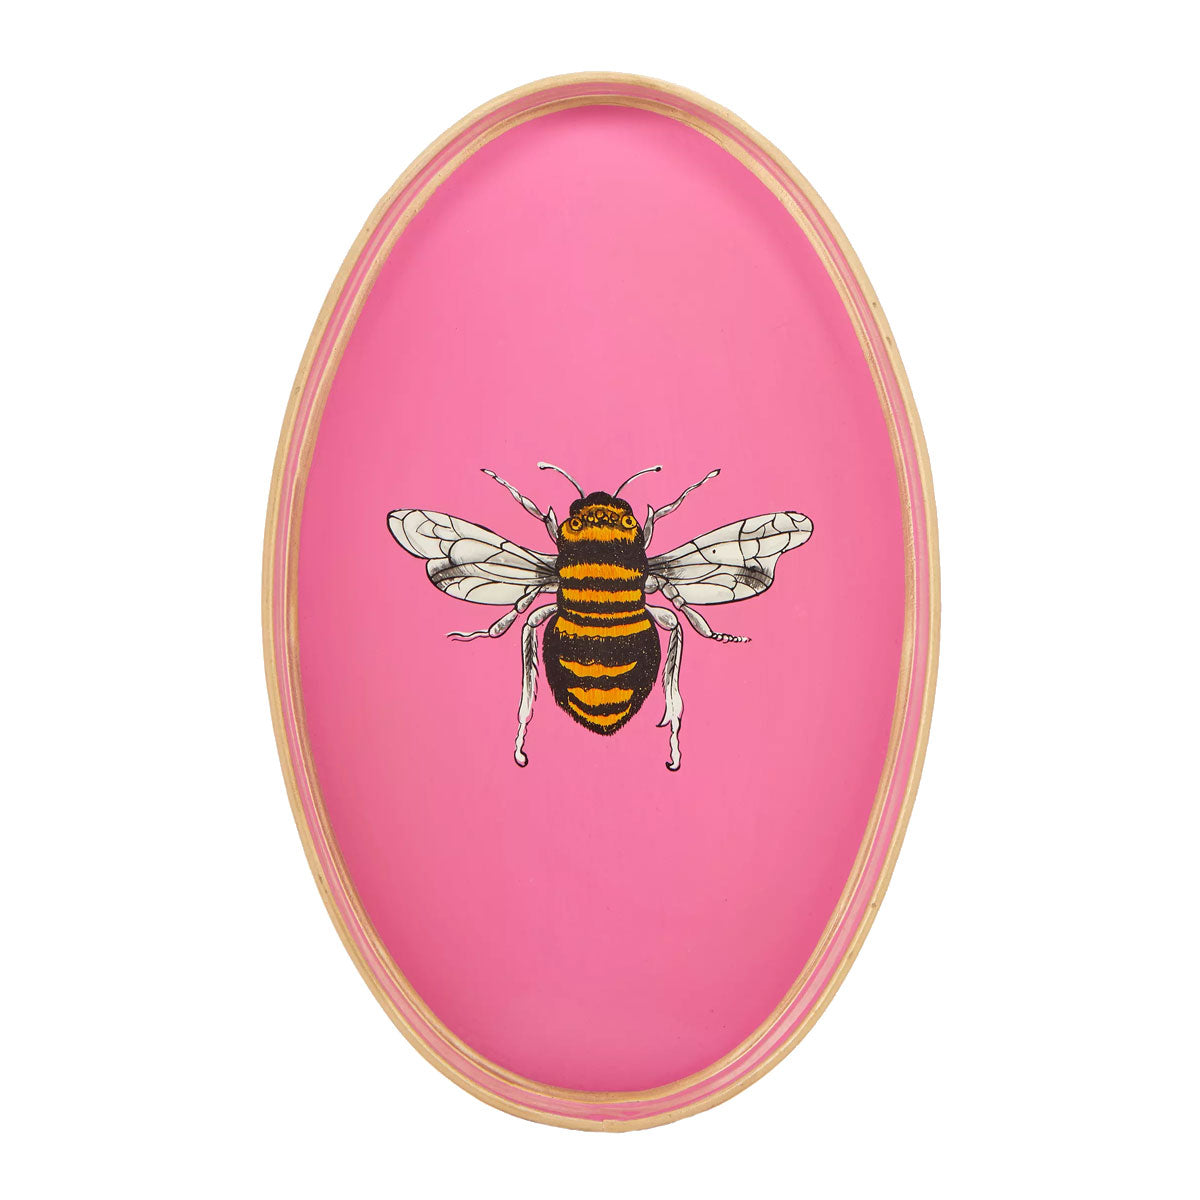 Fauna Hand-painted Iron Tray Bumblebee - Les-Ottomans